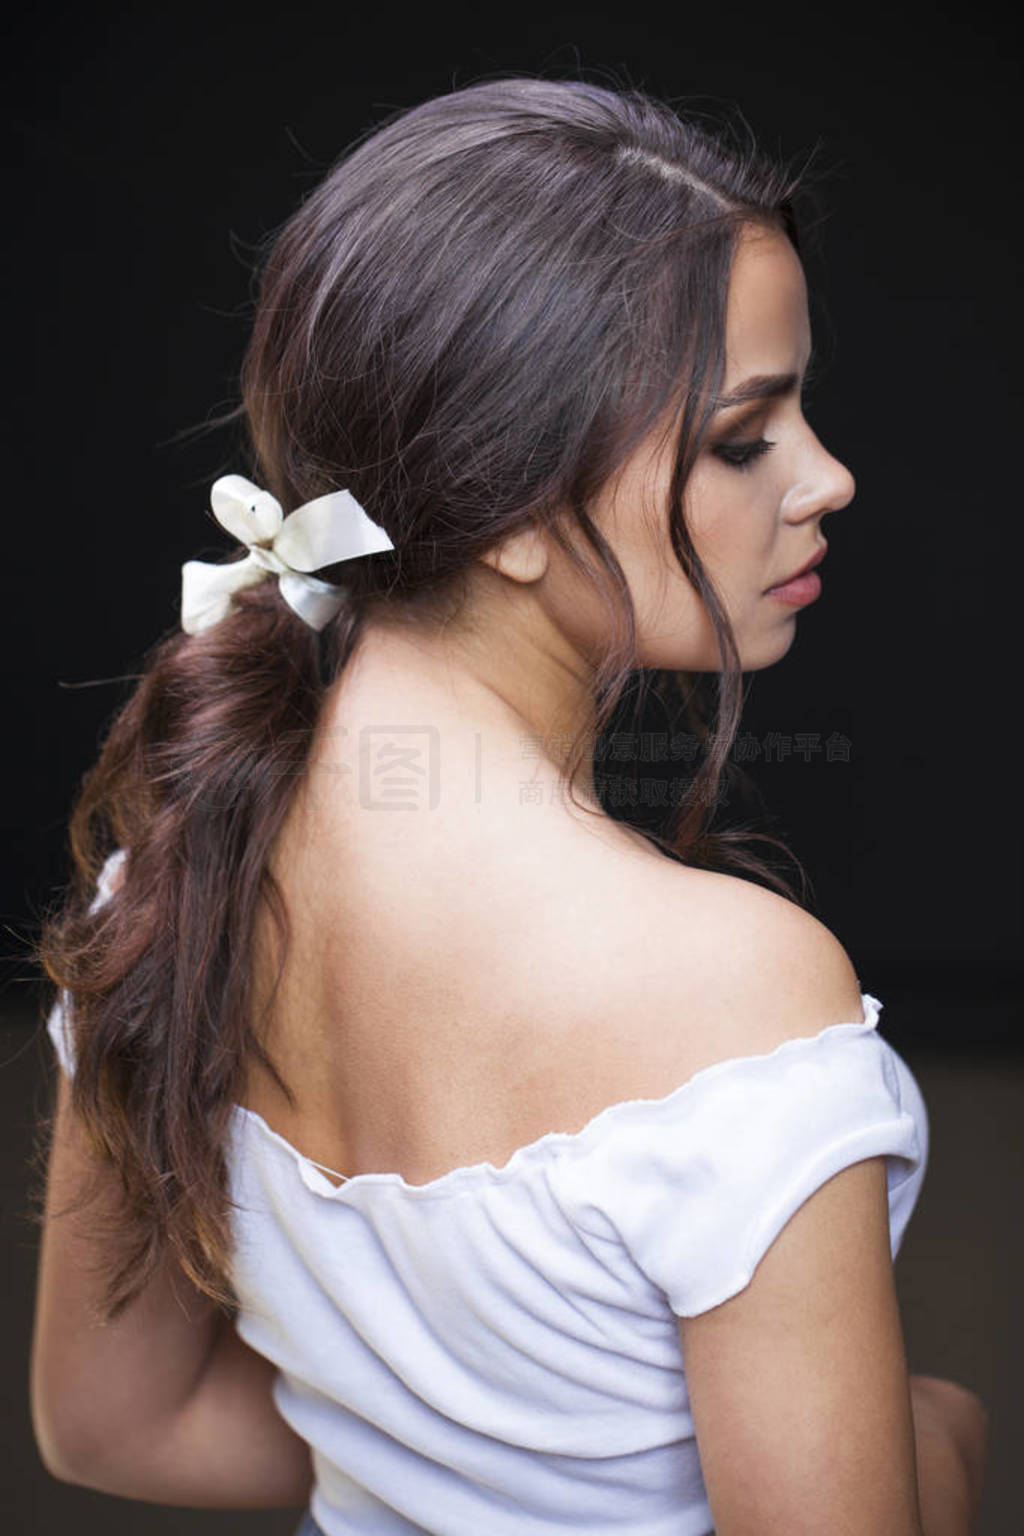 Hair back, young woman with open shoulders